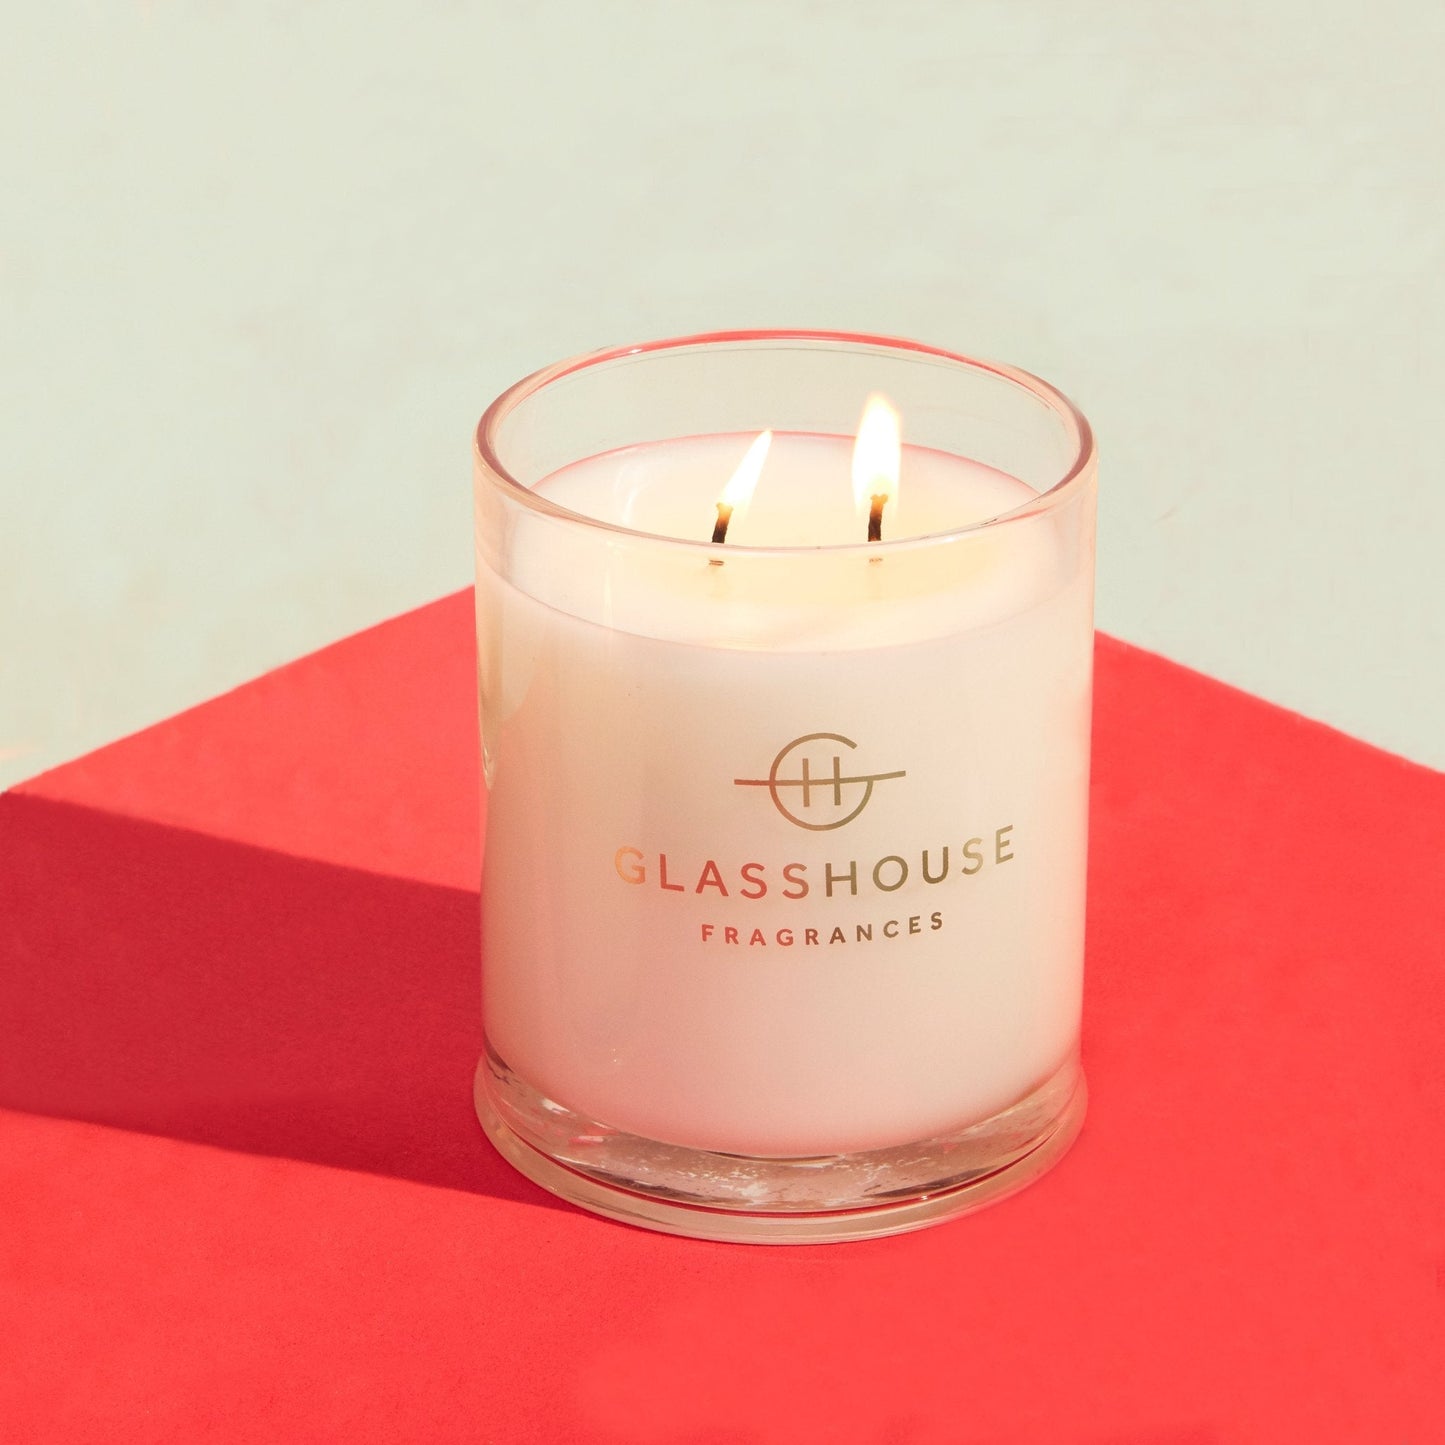 Glasshouse Fragrances - Lost in Amalfi Candle